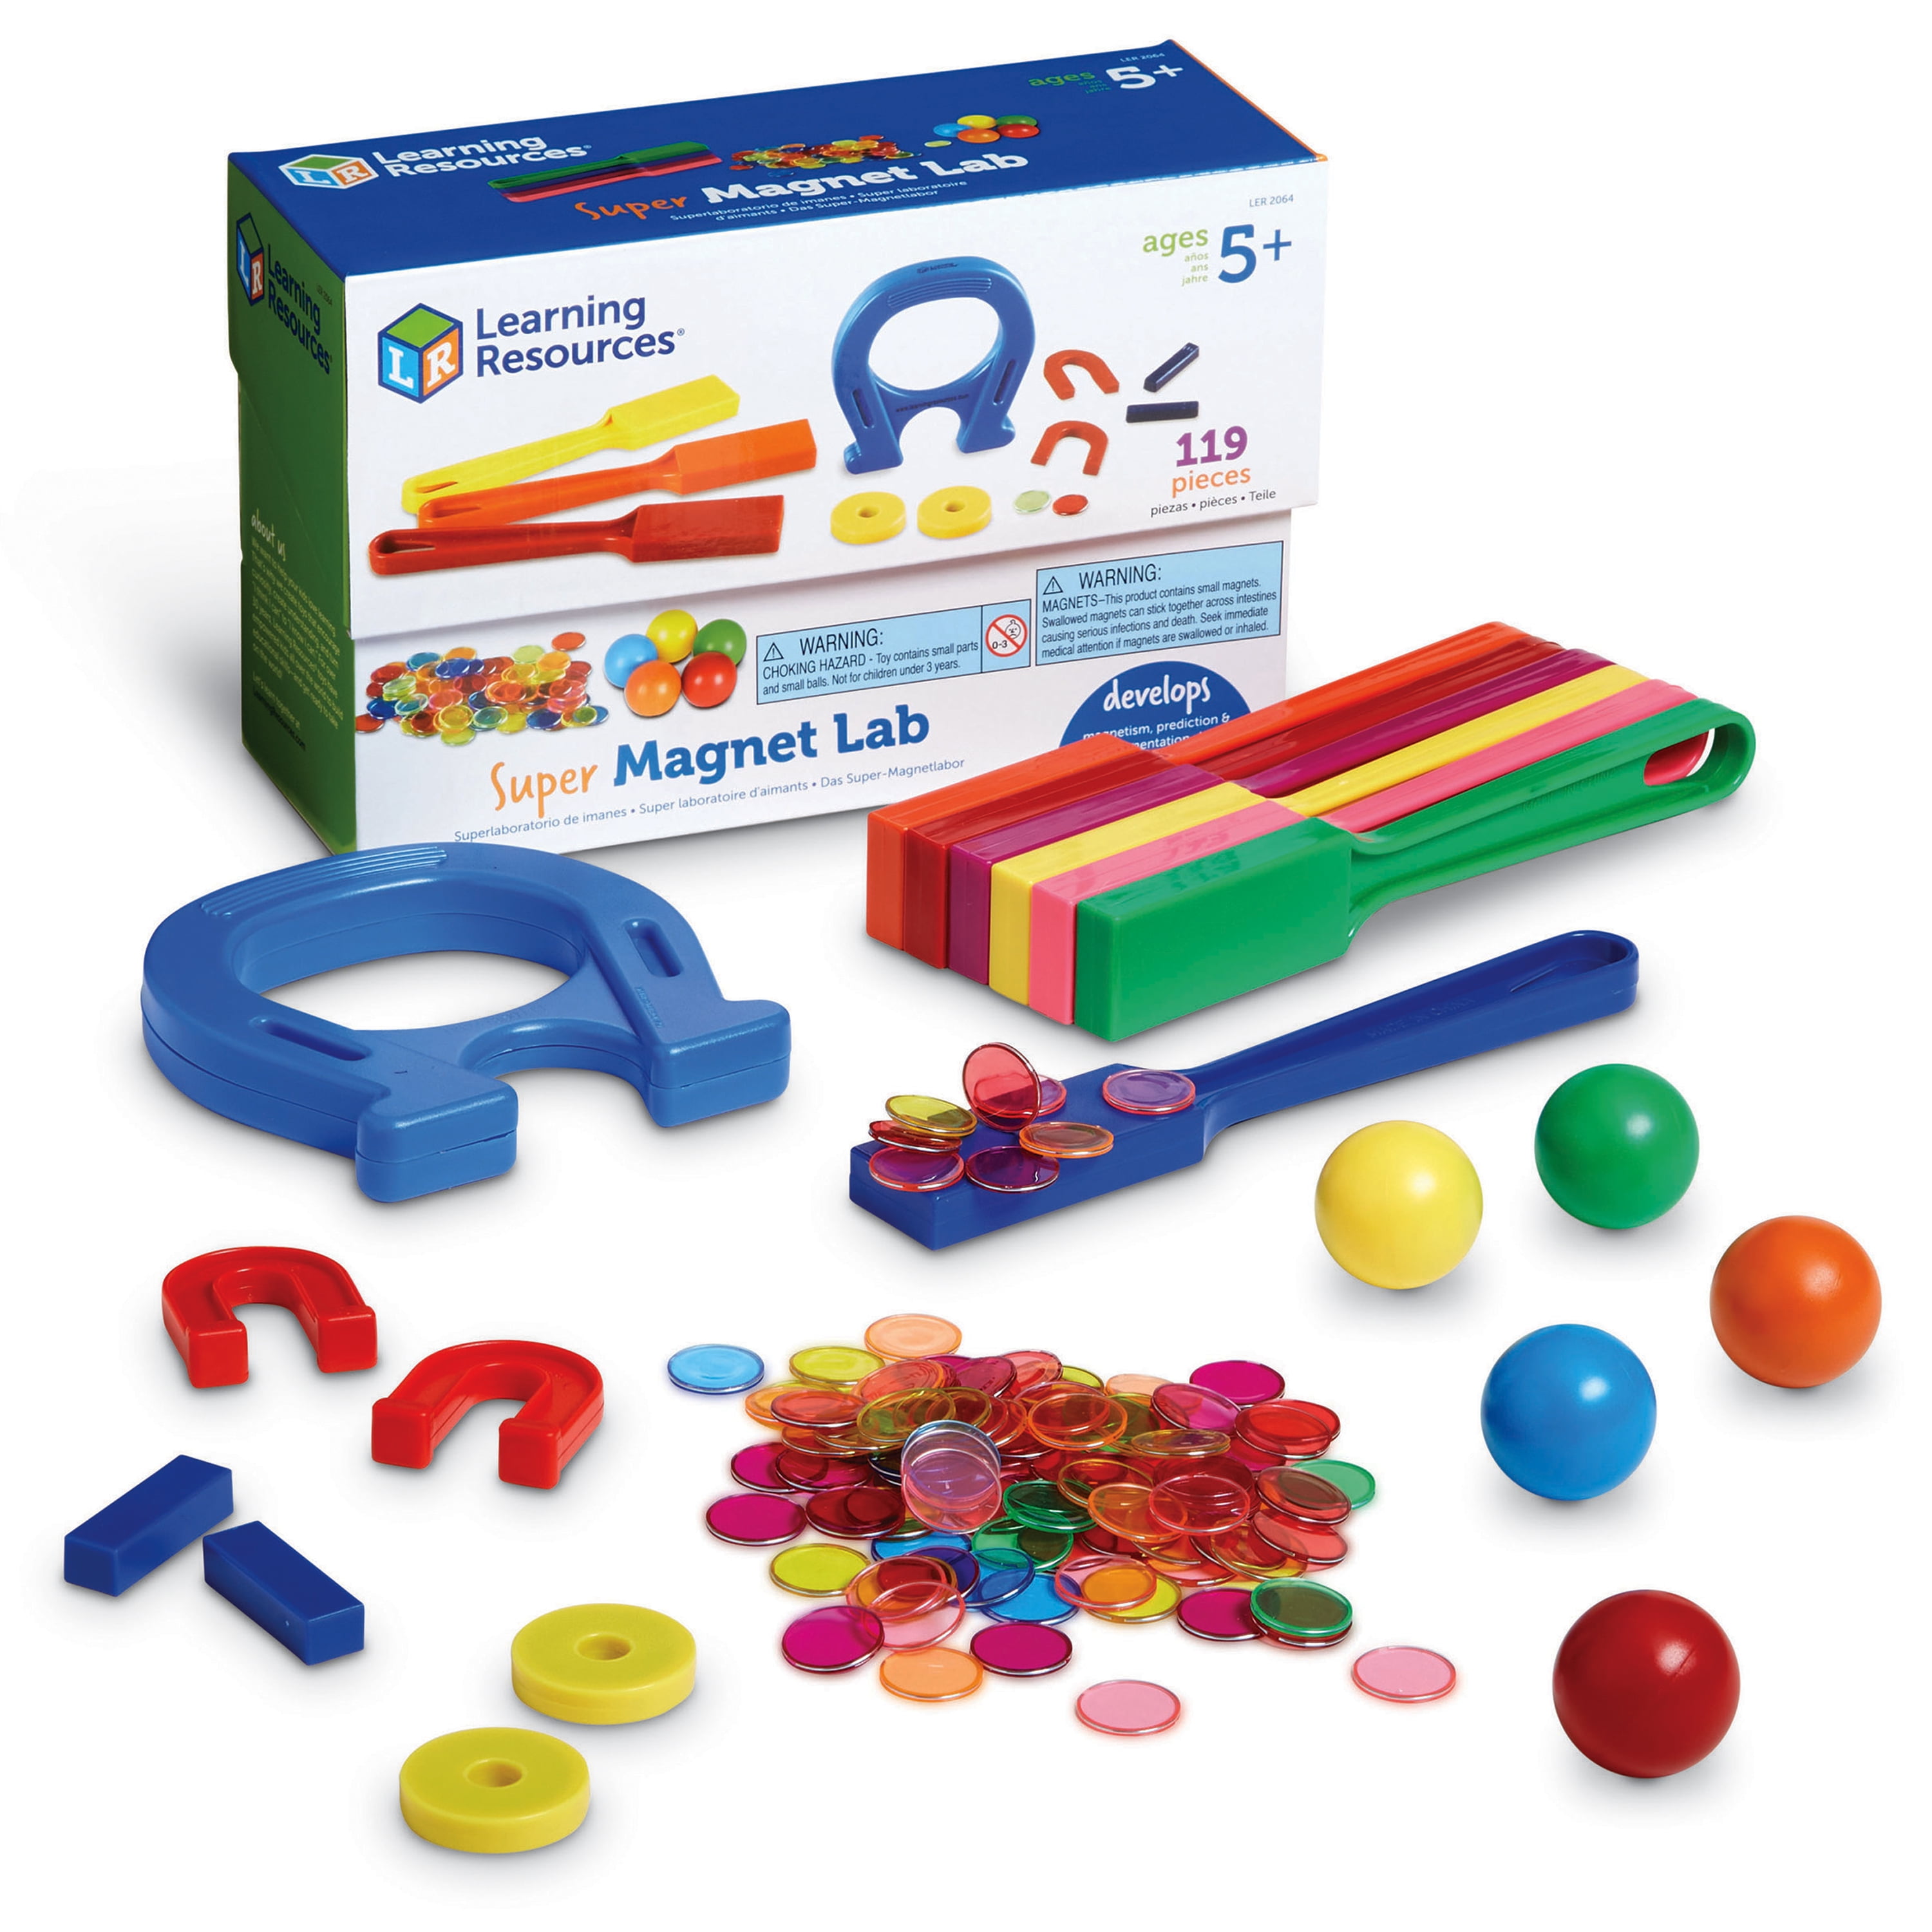 4M Kidz Labs Magnetic Science Model Kit Experiment Educational Science Toy NEW 